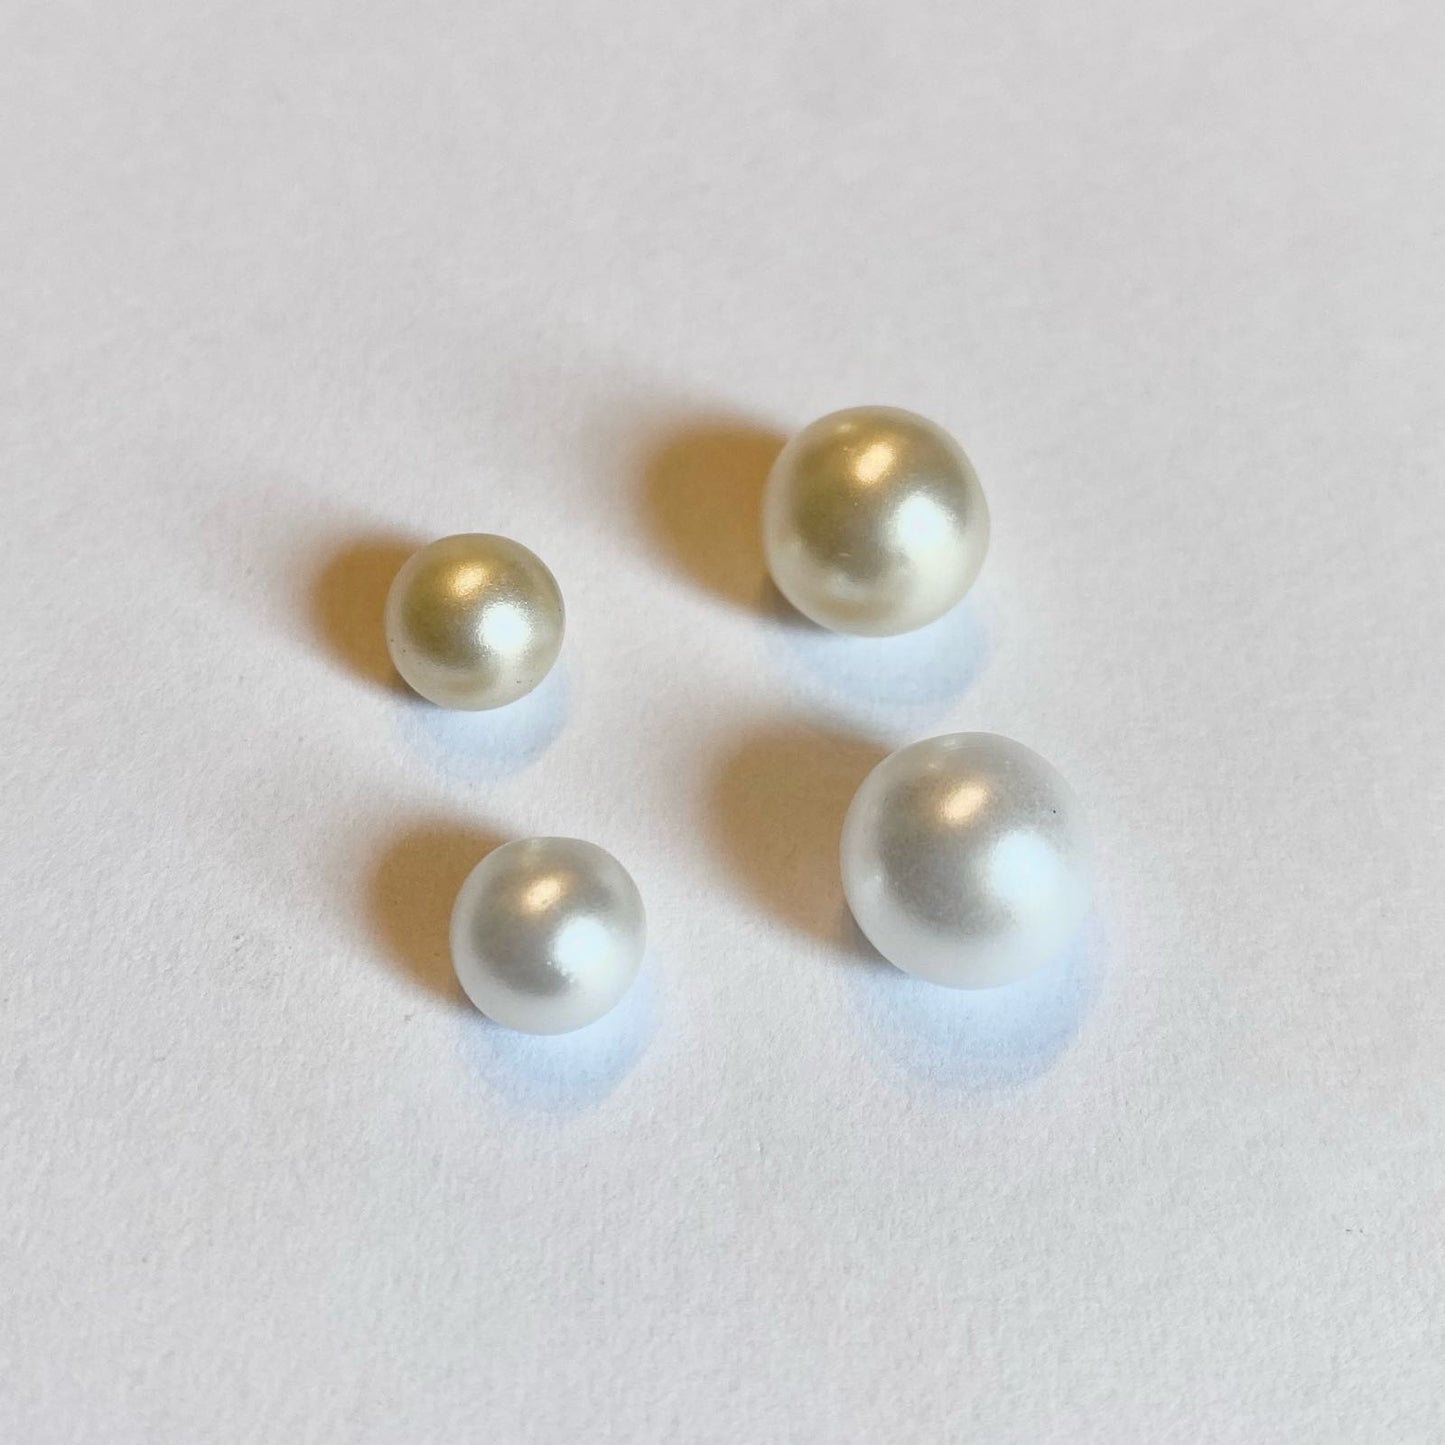 Pearl button 8-12 mm